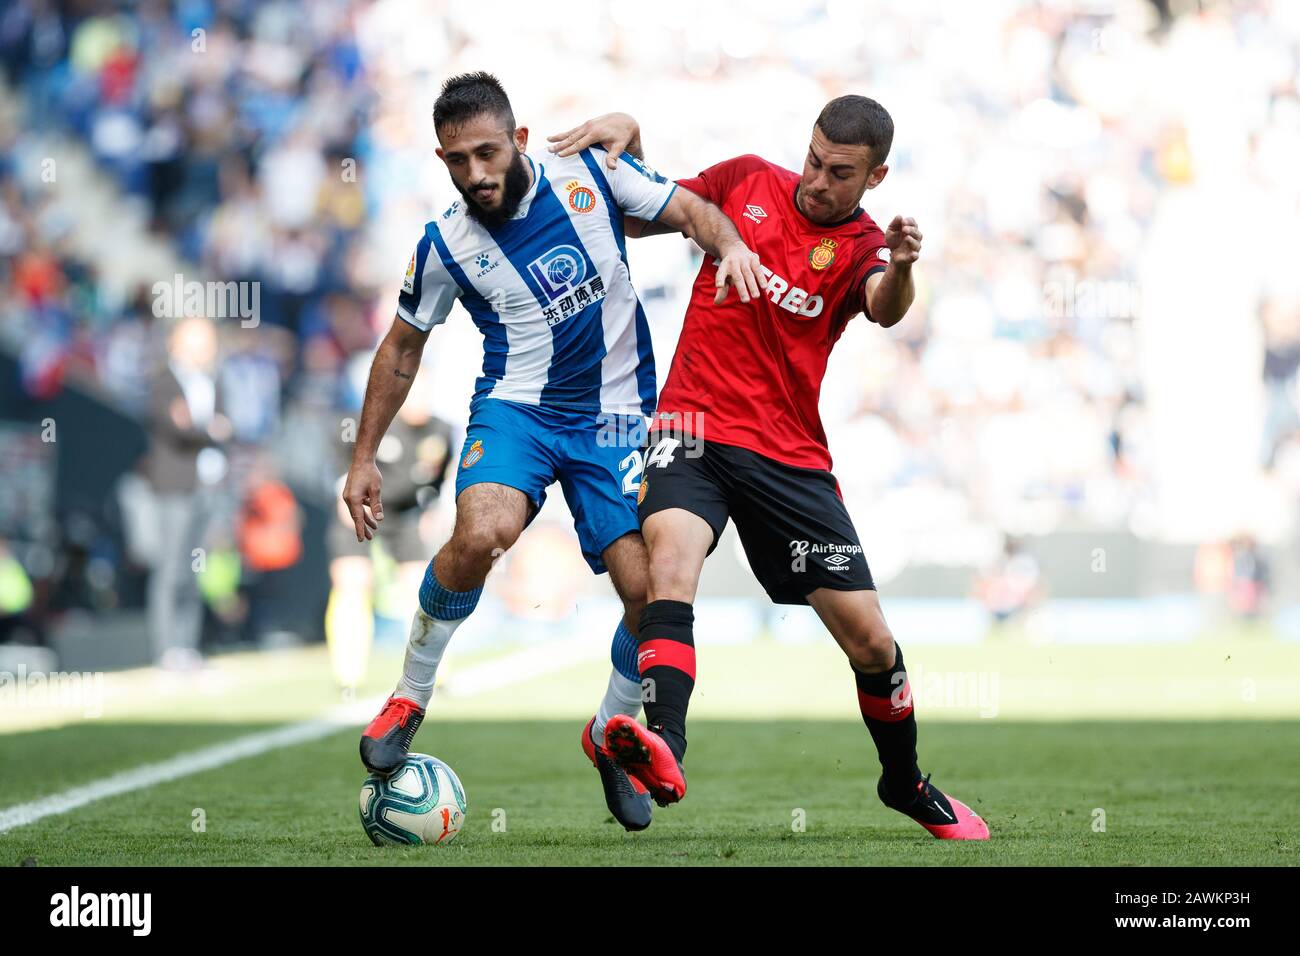 Cornella Del Llobregat, Spain. 09th Feb, 2020. BARCELONA, SPAIN - FEBRUARY 09: Matias Vargas of RCD Espanyol in action with Dani Rodriguez of RCD Mallorca during the Liga match between RCD Espanyol and FC Barcelona at RCD Stadium on February 09, 2020 in Barcelona, Spain. Credit: Dax Images/Alamy Live News Stock Photo